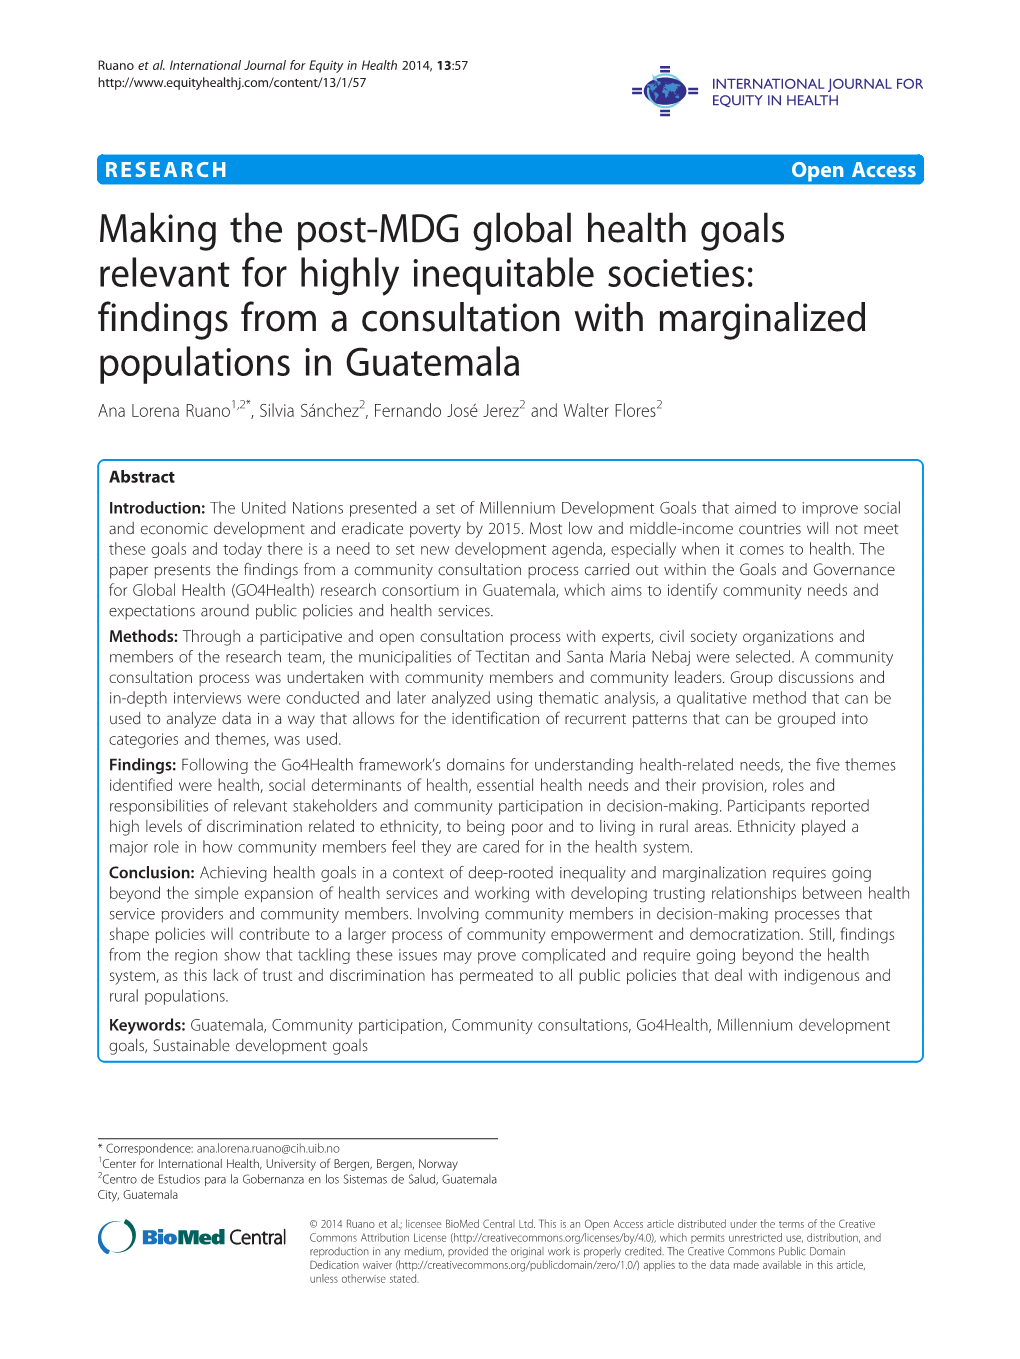 Making the Post-MDG Global Health Goals Relevant for Highly Inequitable